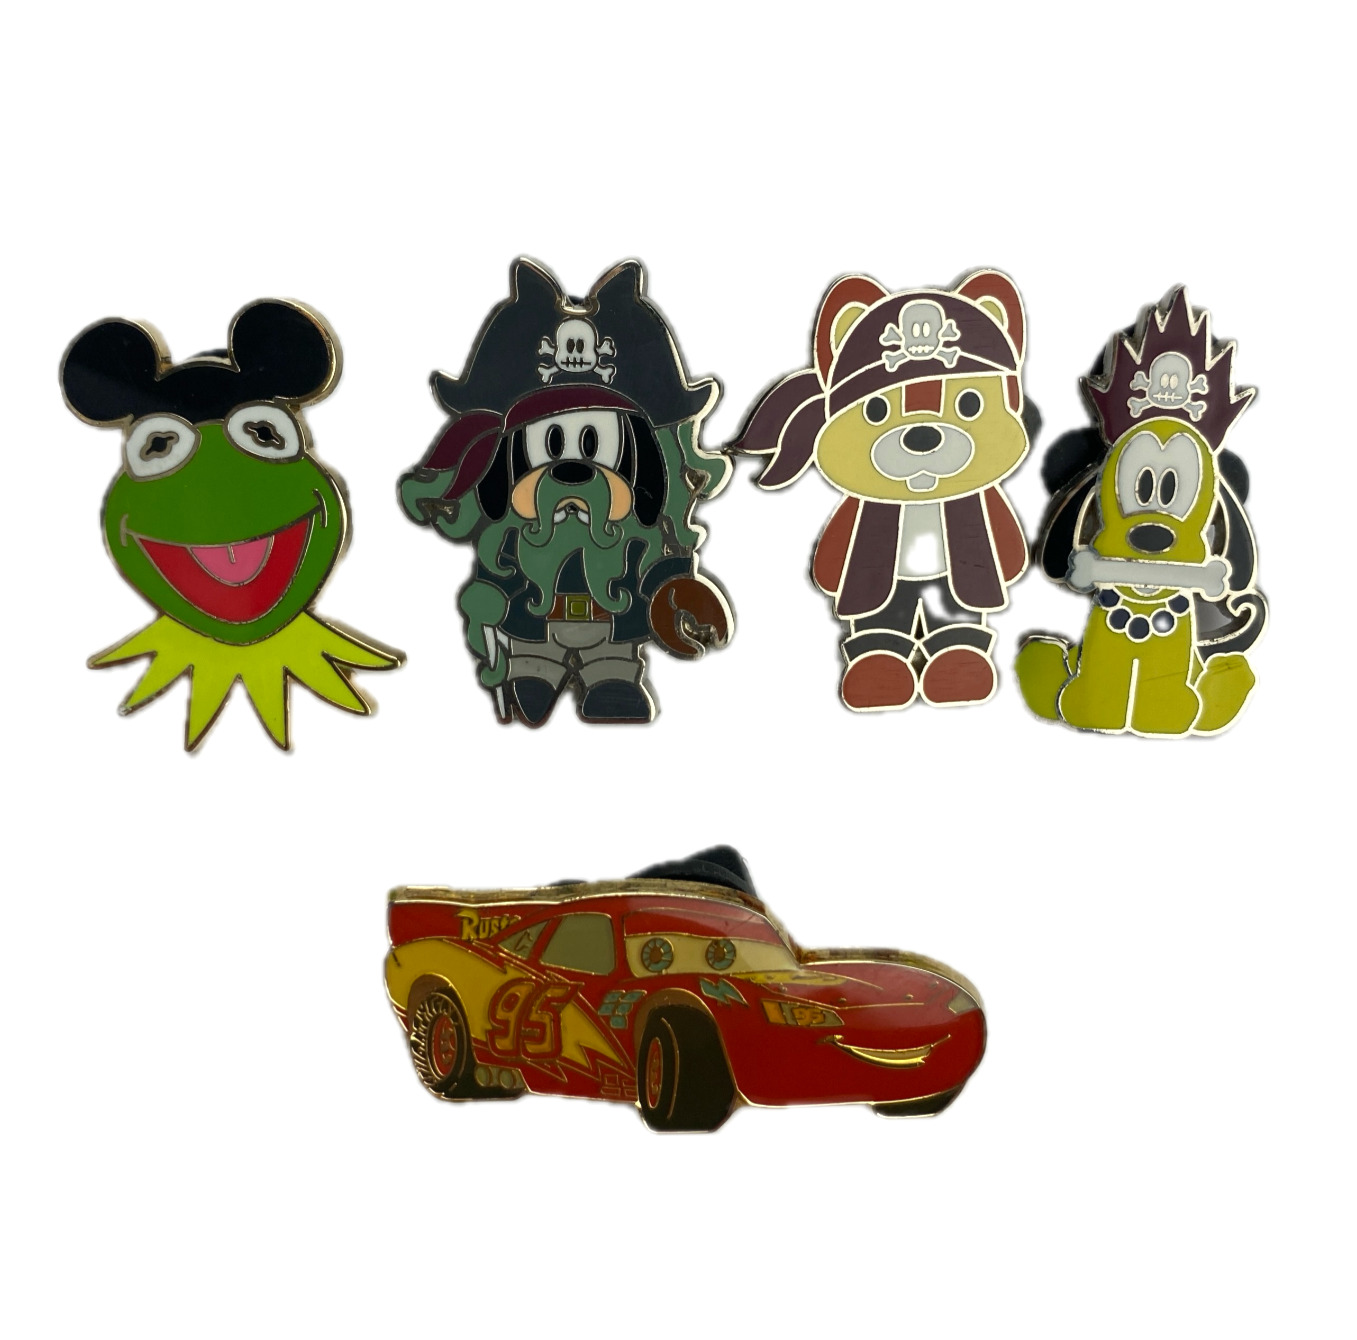 Disney Trading Pins Pirates of the Caribbean Muppets Cars Kermit Lot of 5 Pixar